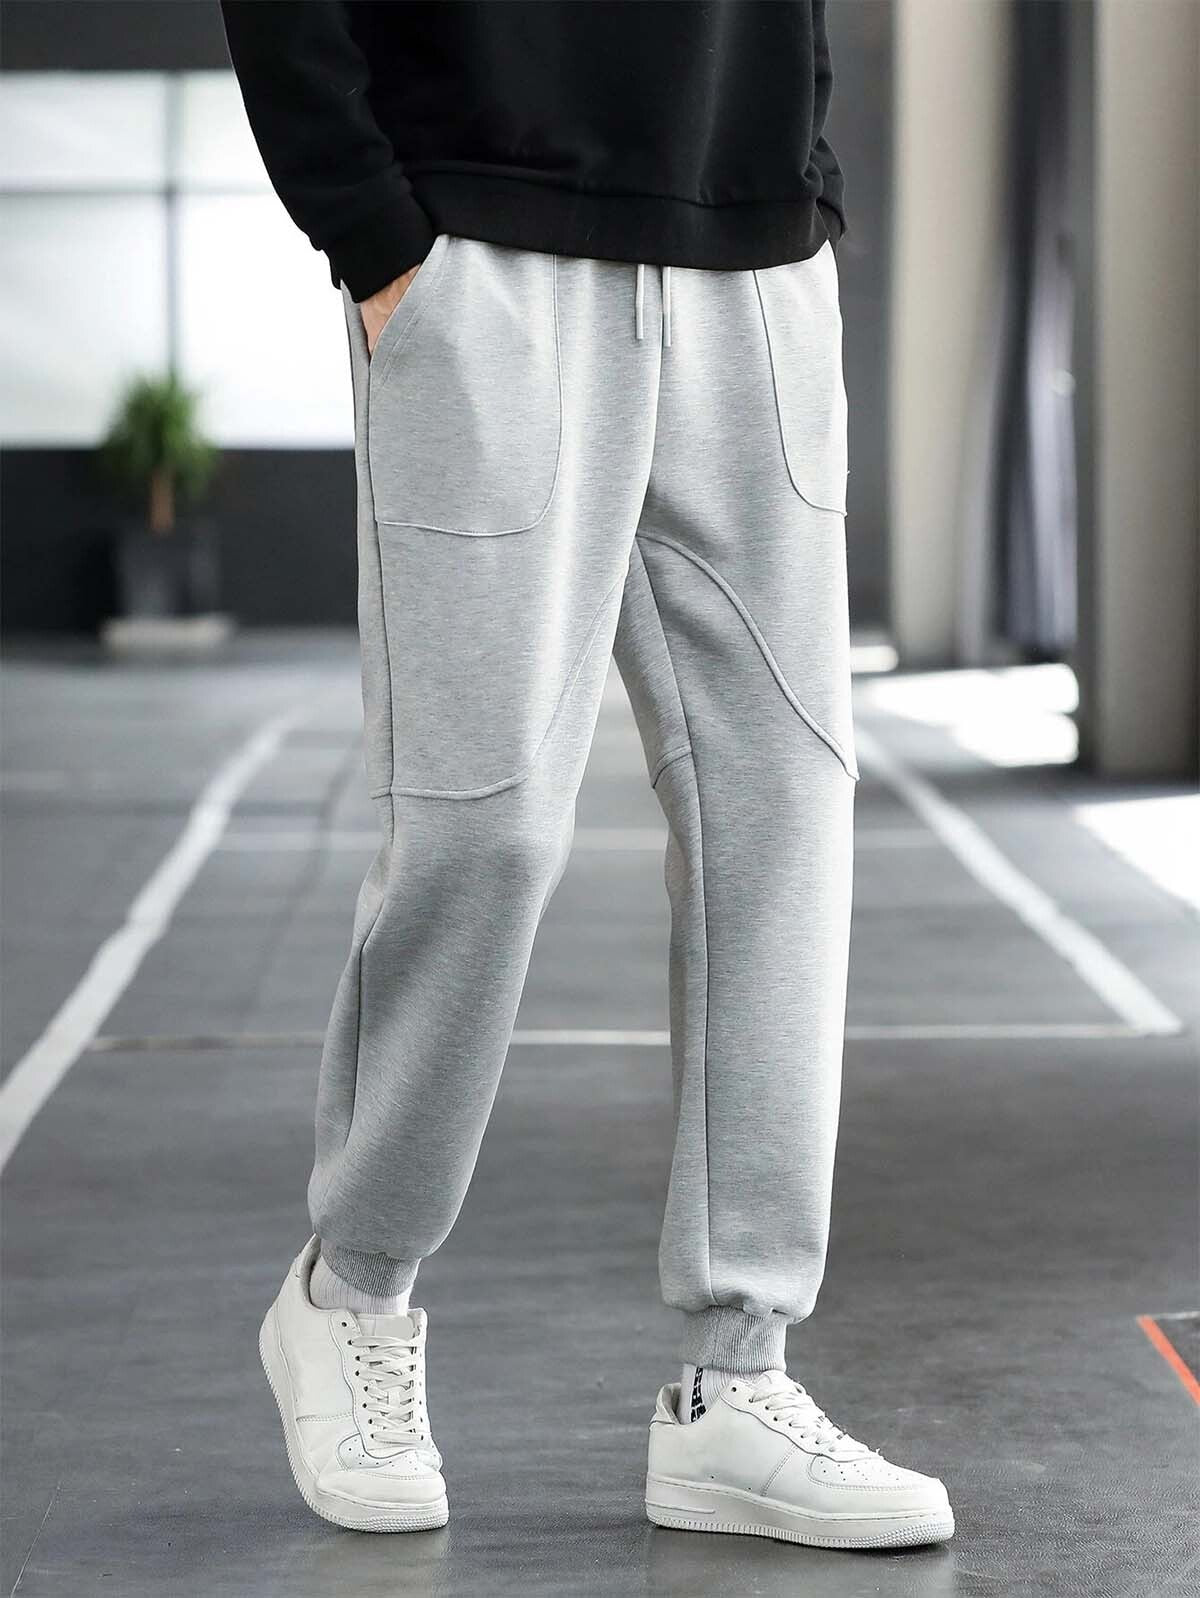 Men's Trackpants Lower With Pocket | CHKOKKO